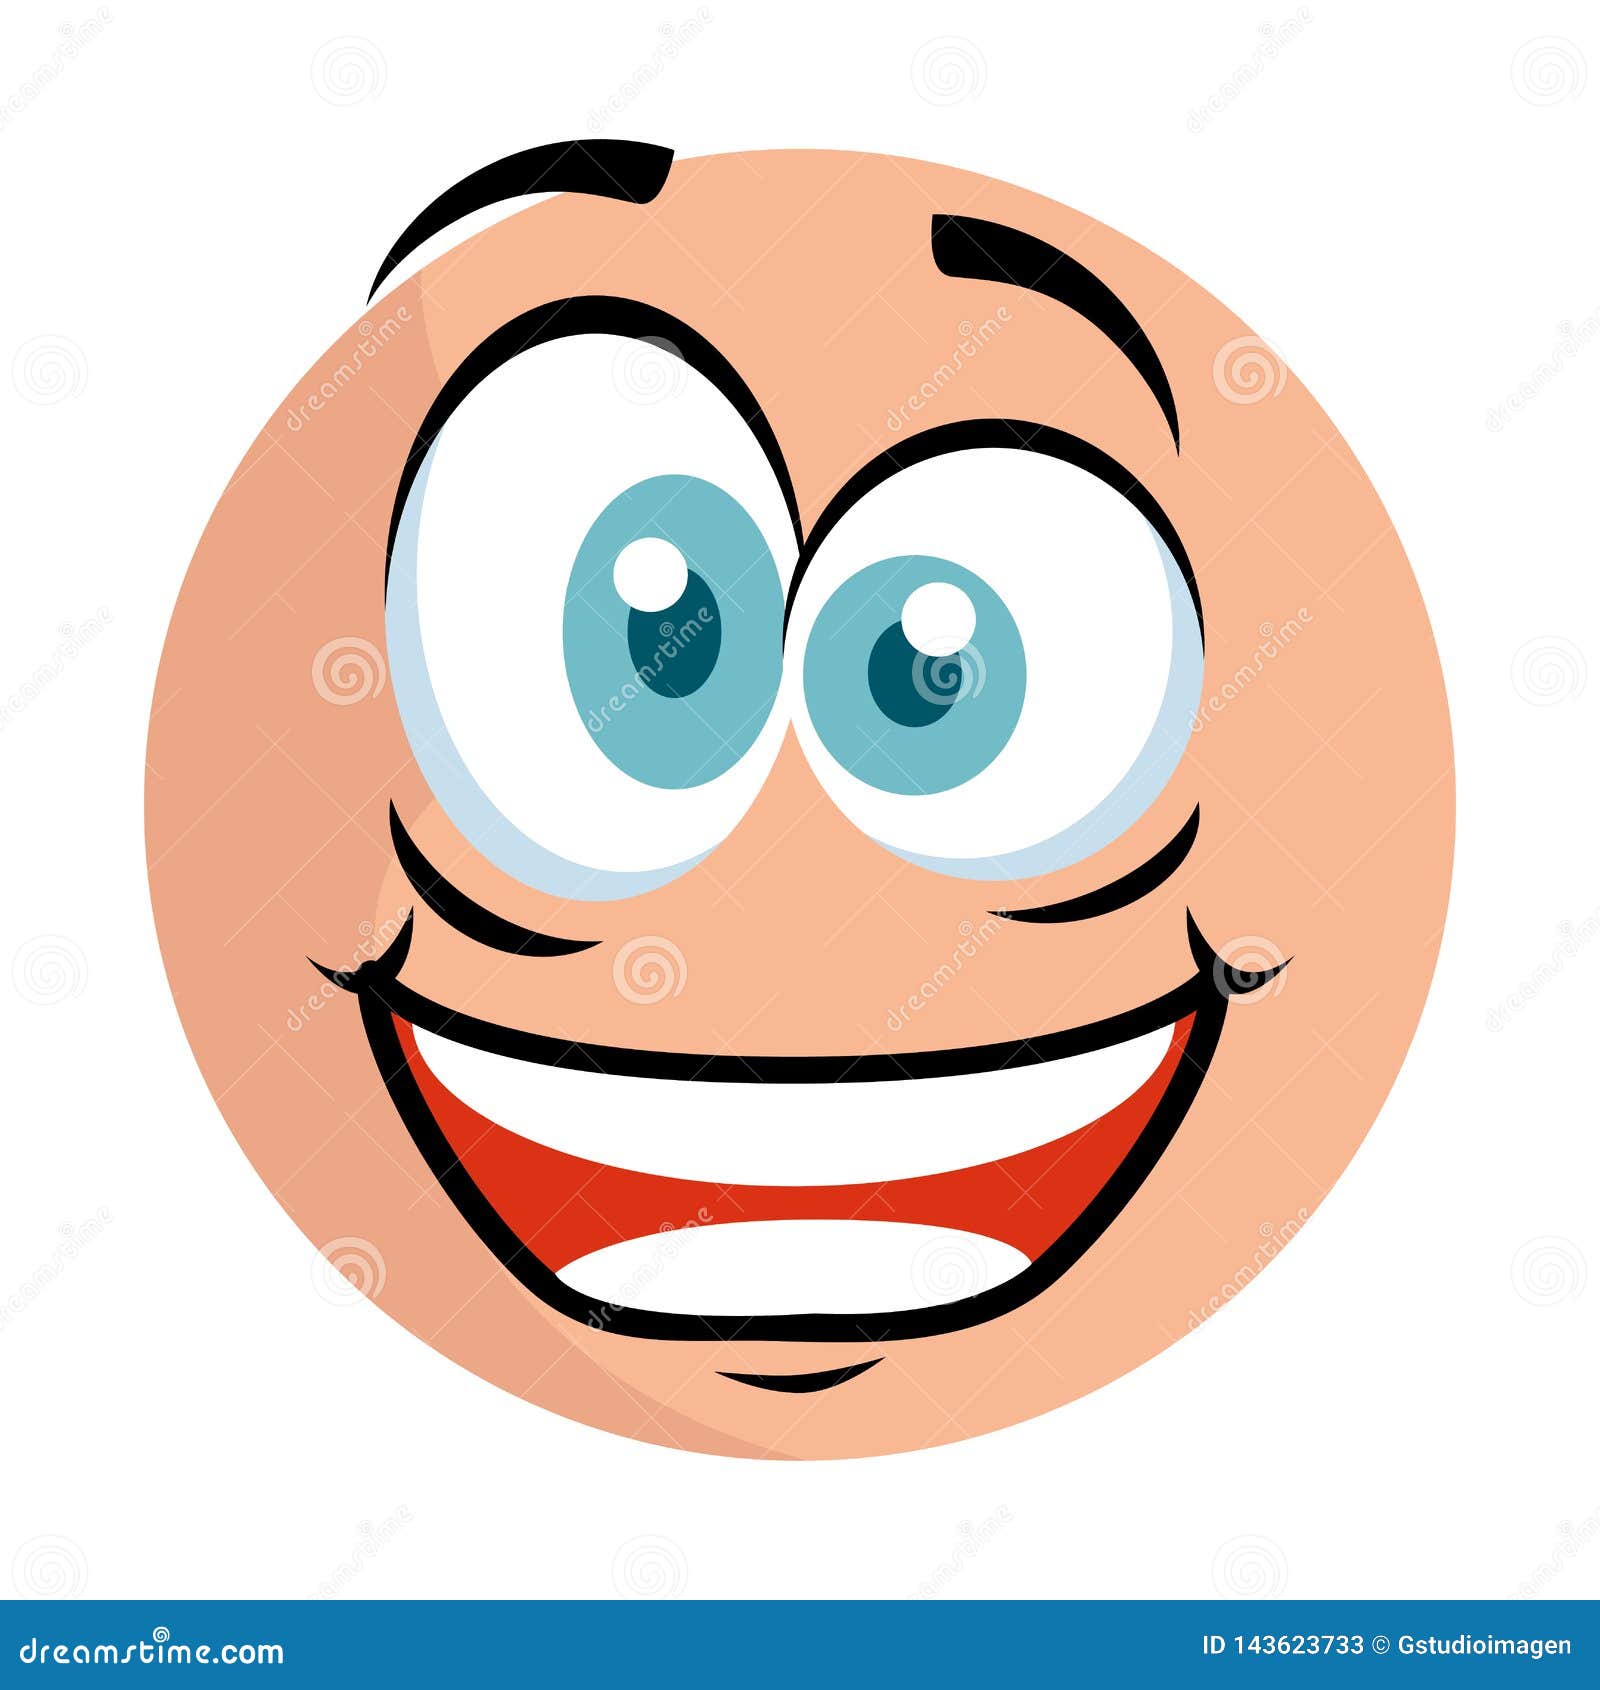 Cute Emoticon With Crazy Face Stock Vector Illustration Of Emotion